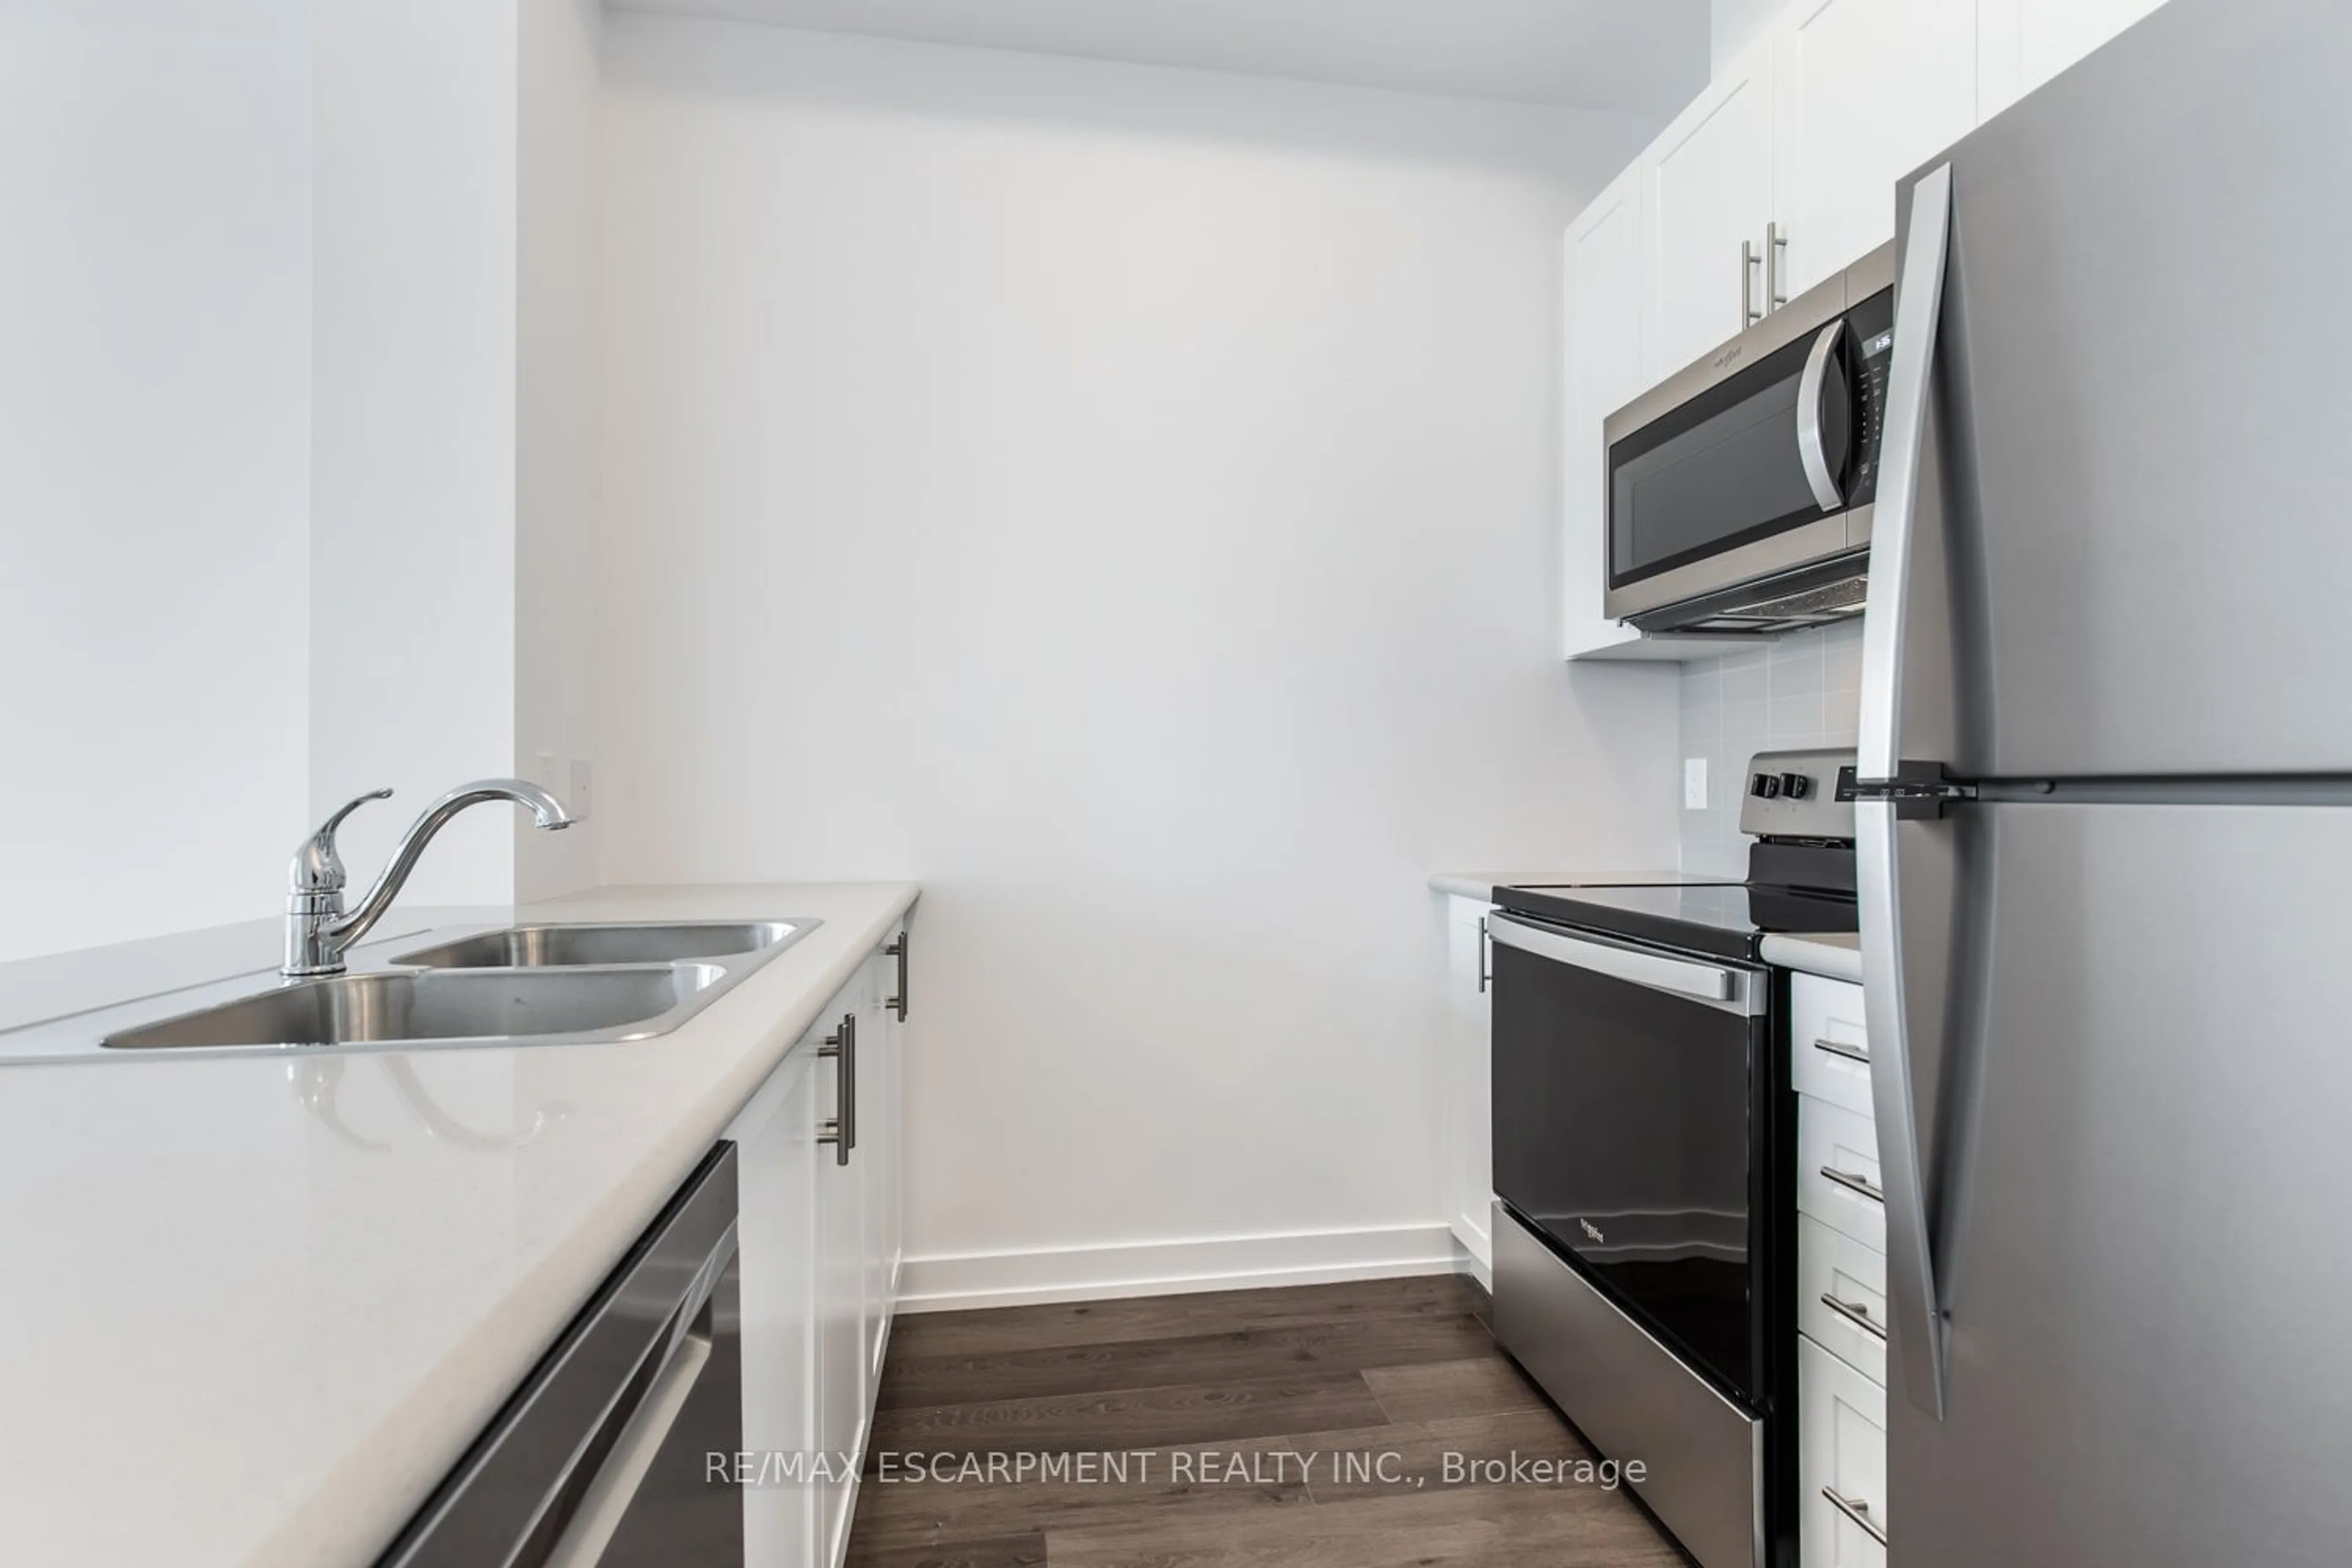 Standard kitchen for 5055 Greenlane Rd #617, Lincoln Ontario L0R 1B3